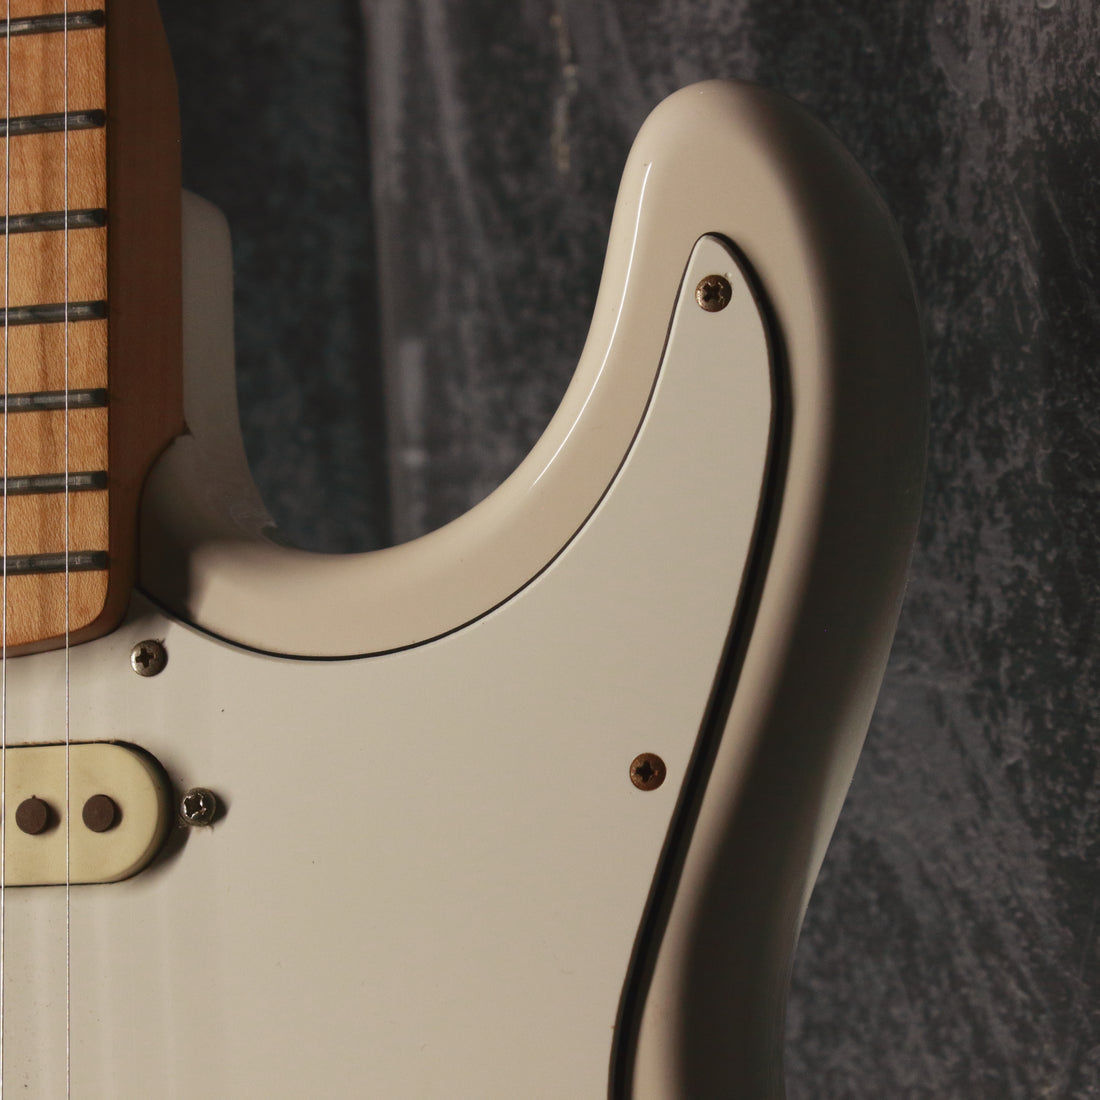 Daion Superstrat-Style White 1988